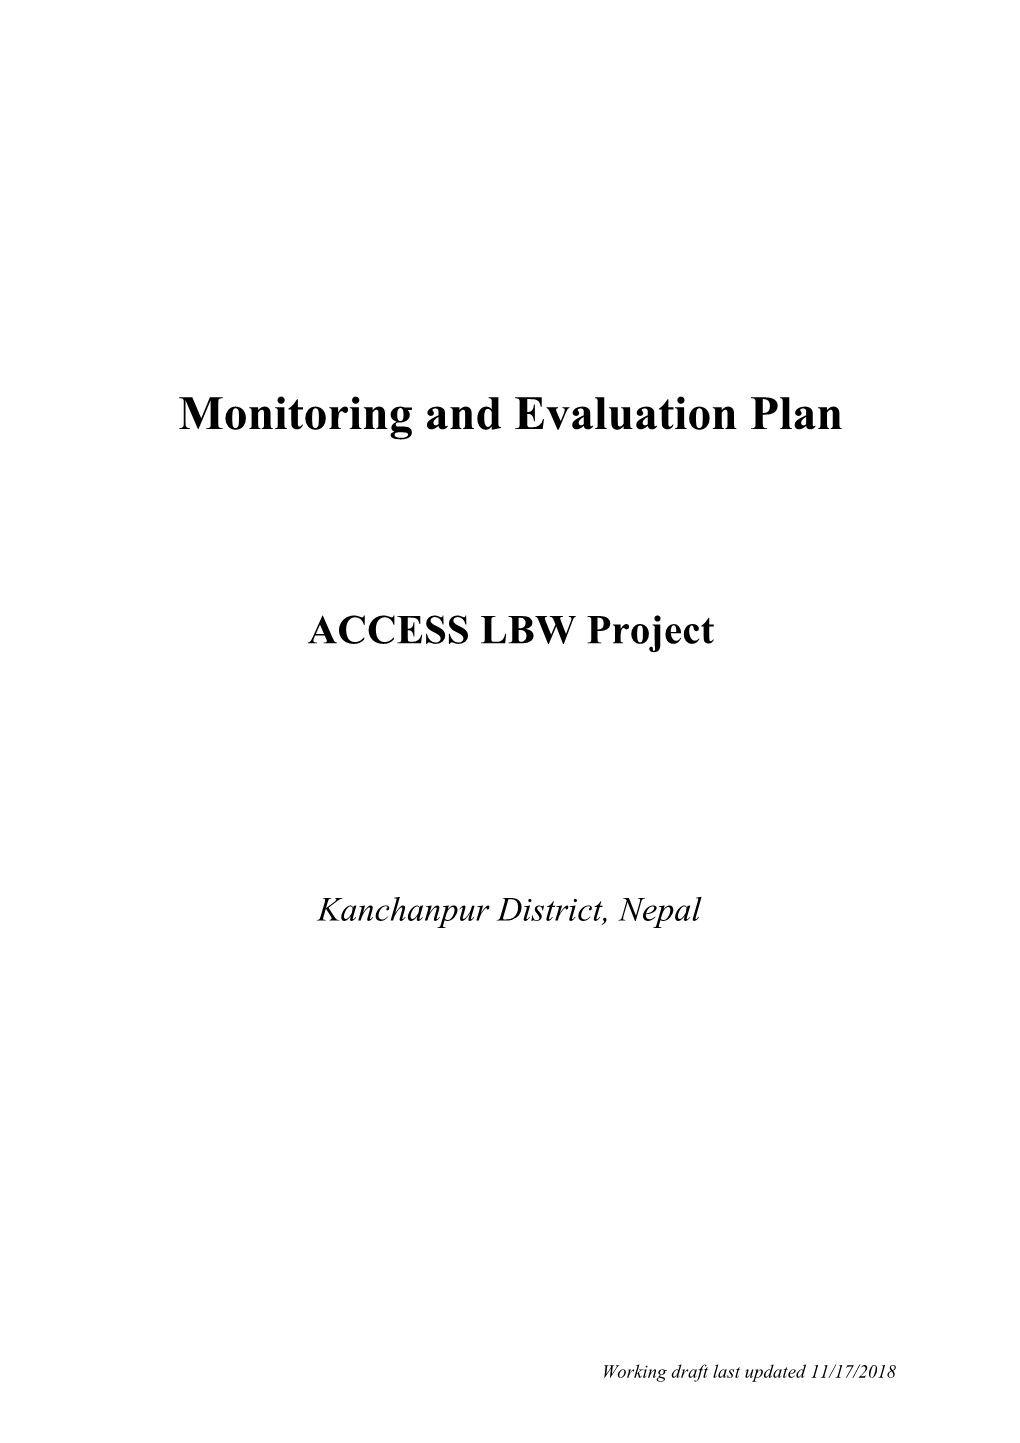 CB-MNC Monitoring and Evaluation Plan Outline